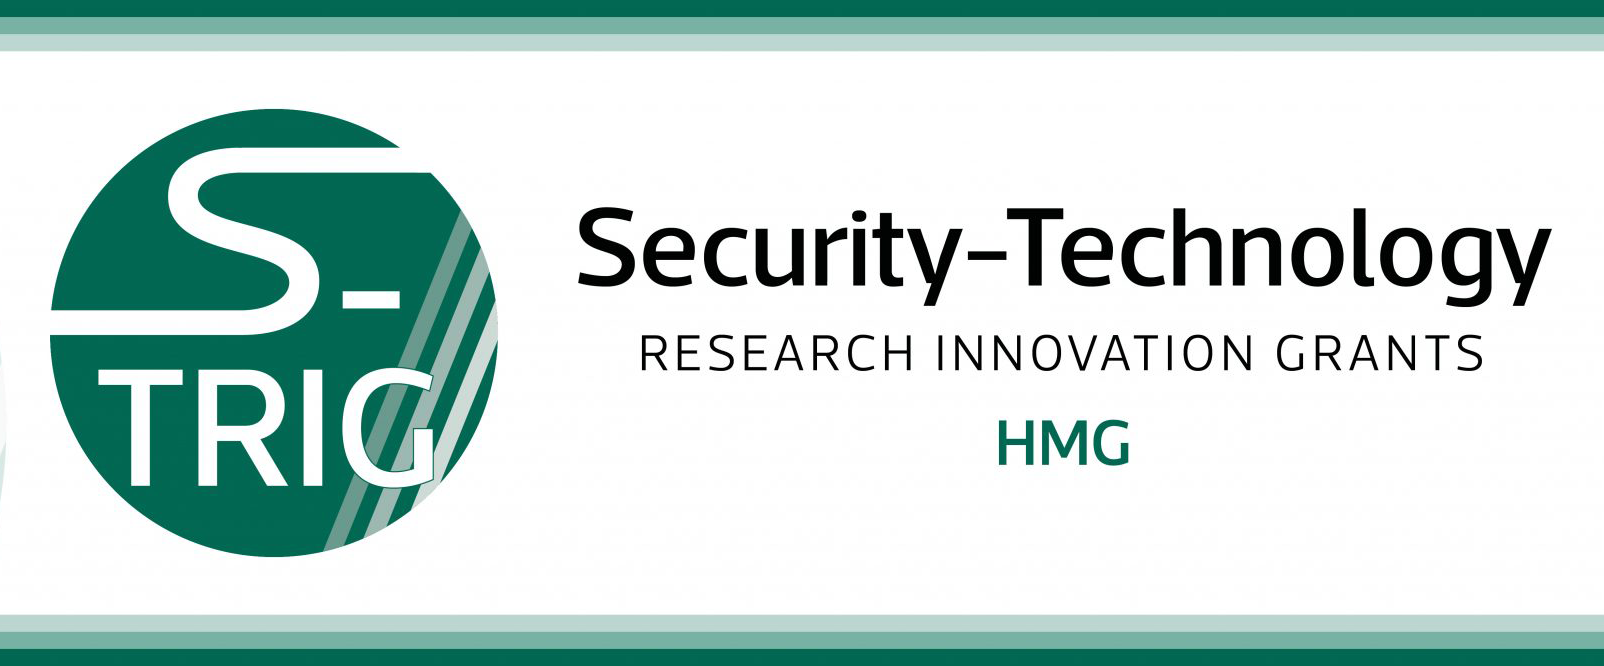 Security Technology Research Innovation Grants Programme (S-TRIG)